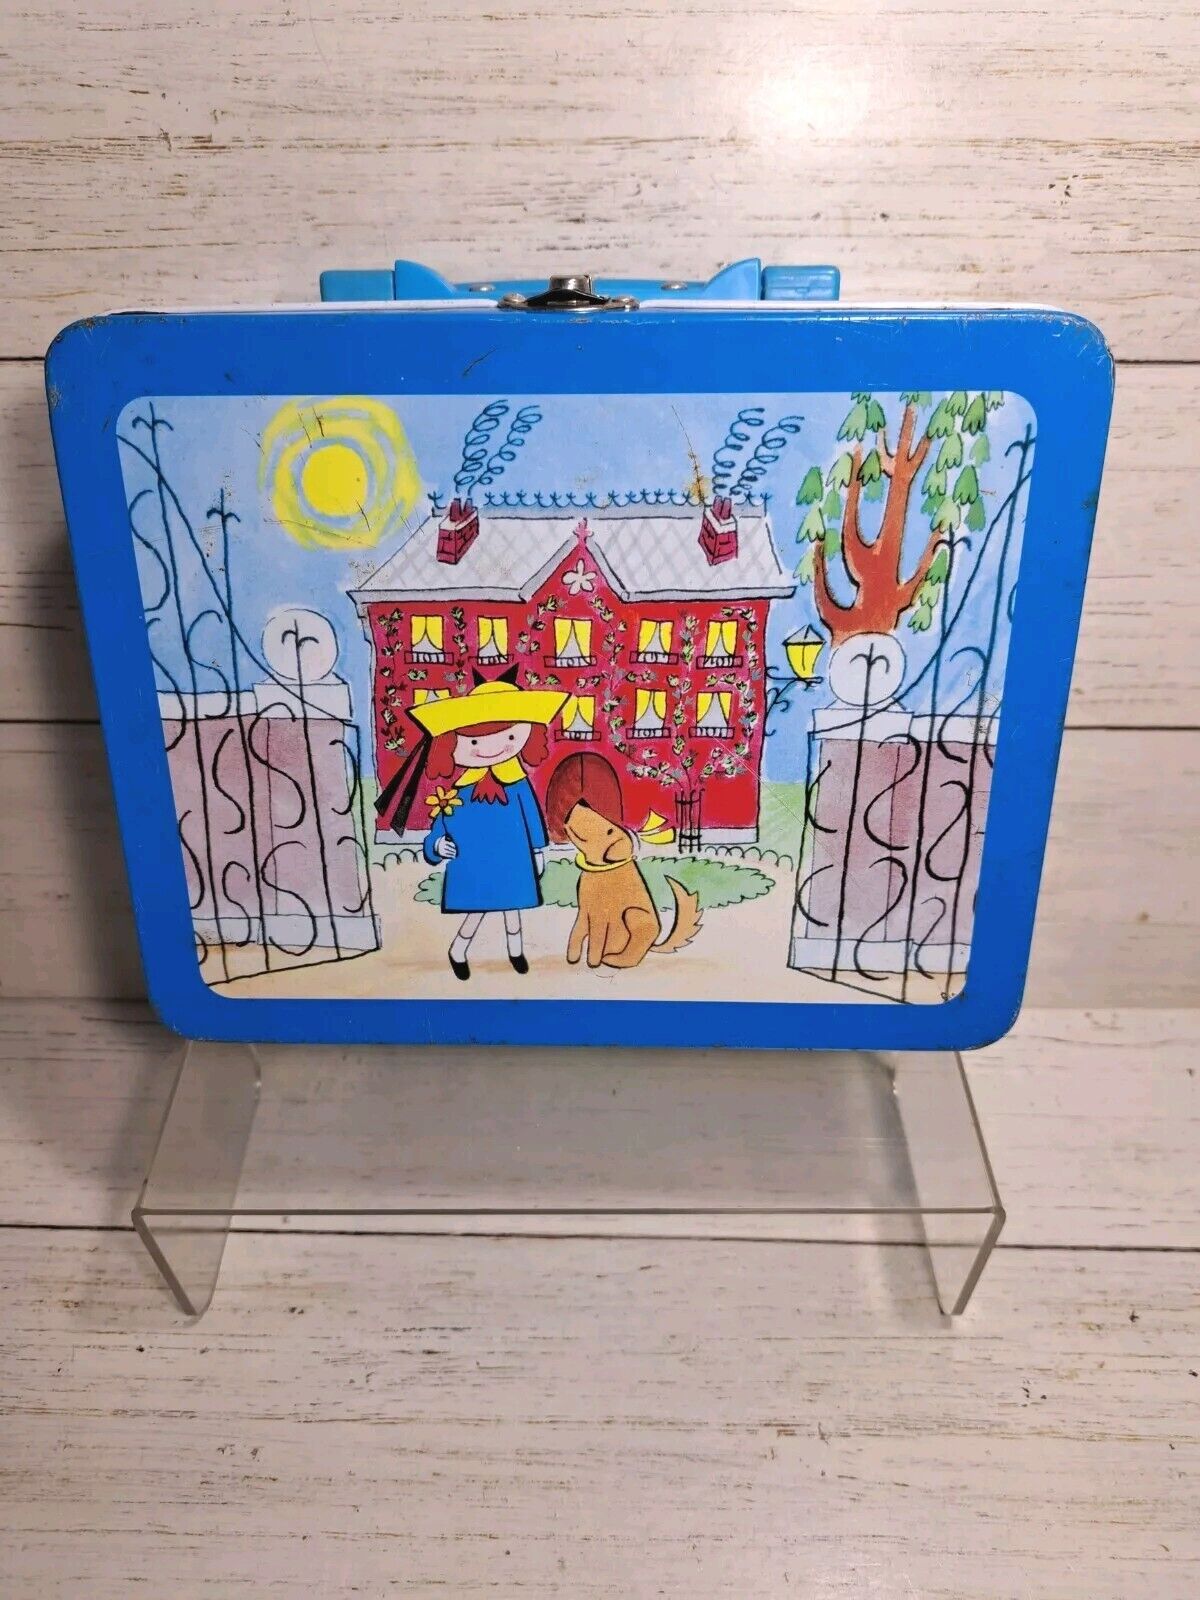 Madeline Metal Lunch Box 1997 Vintage Kids Children\'s Book Character Dog House